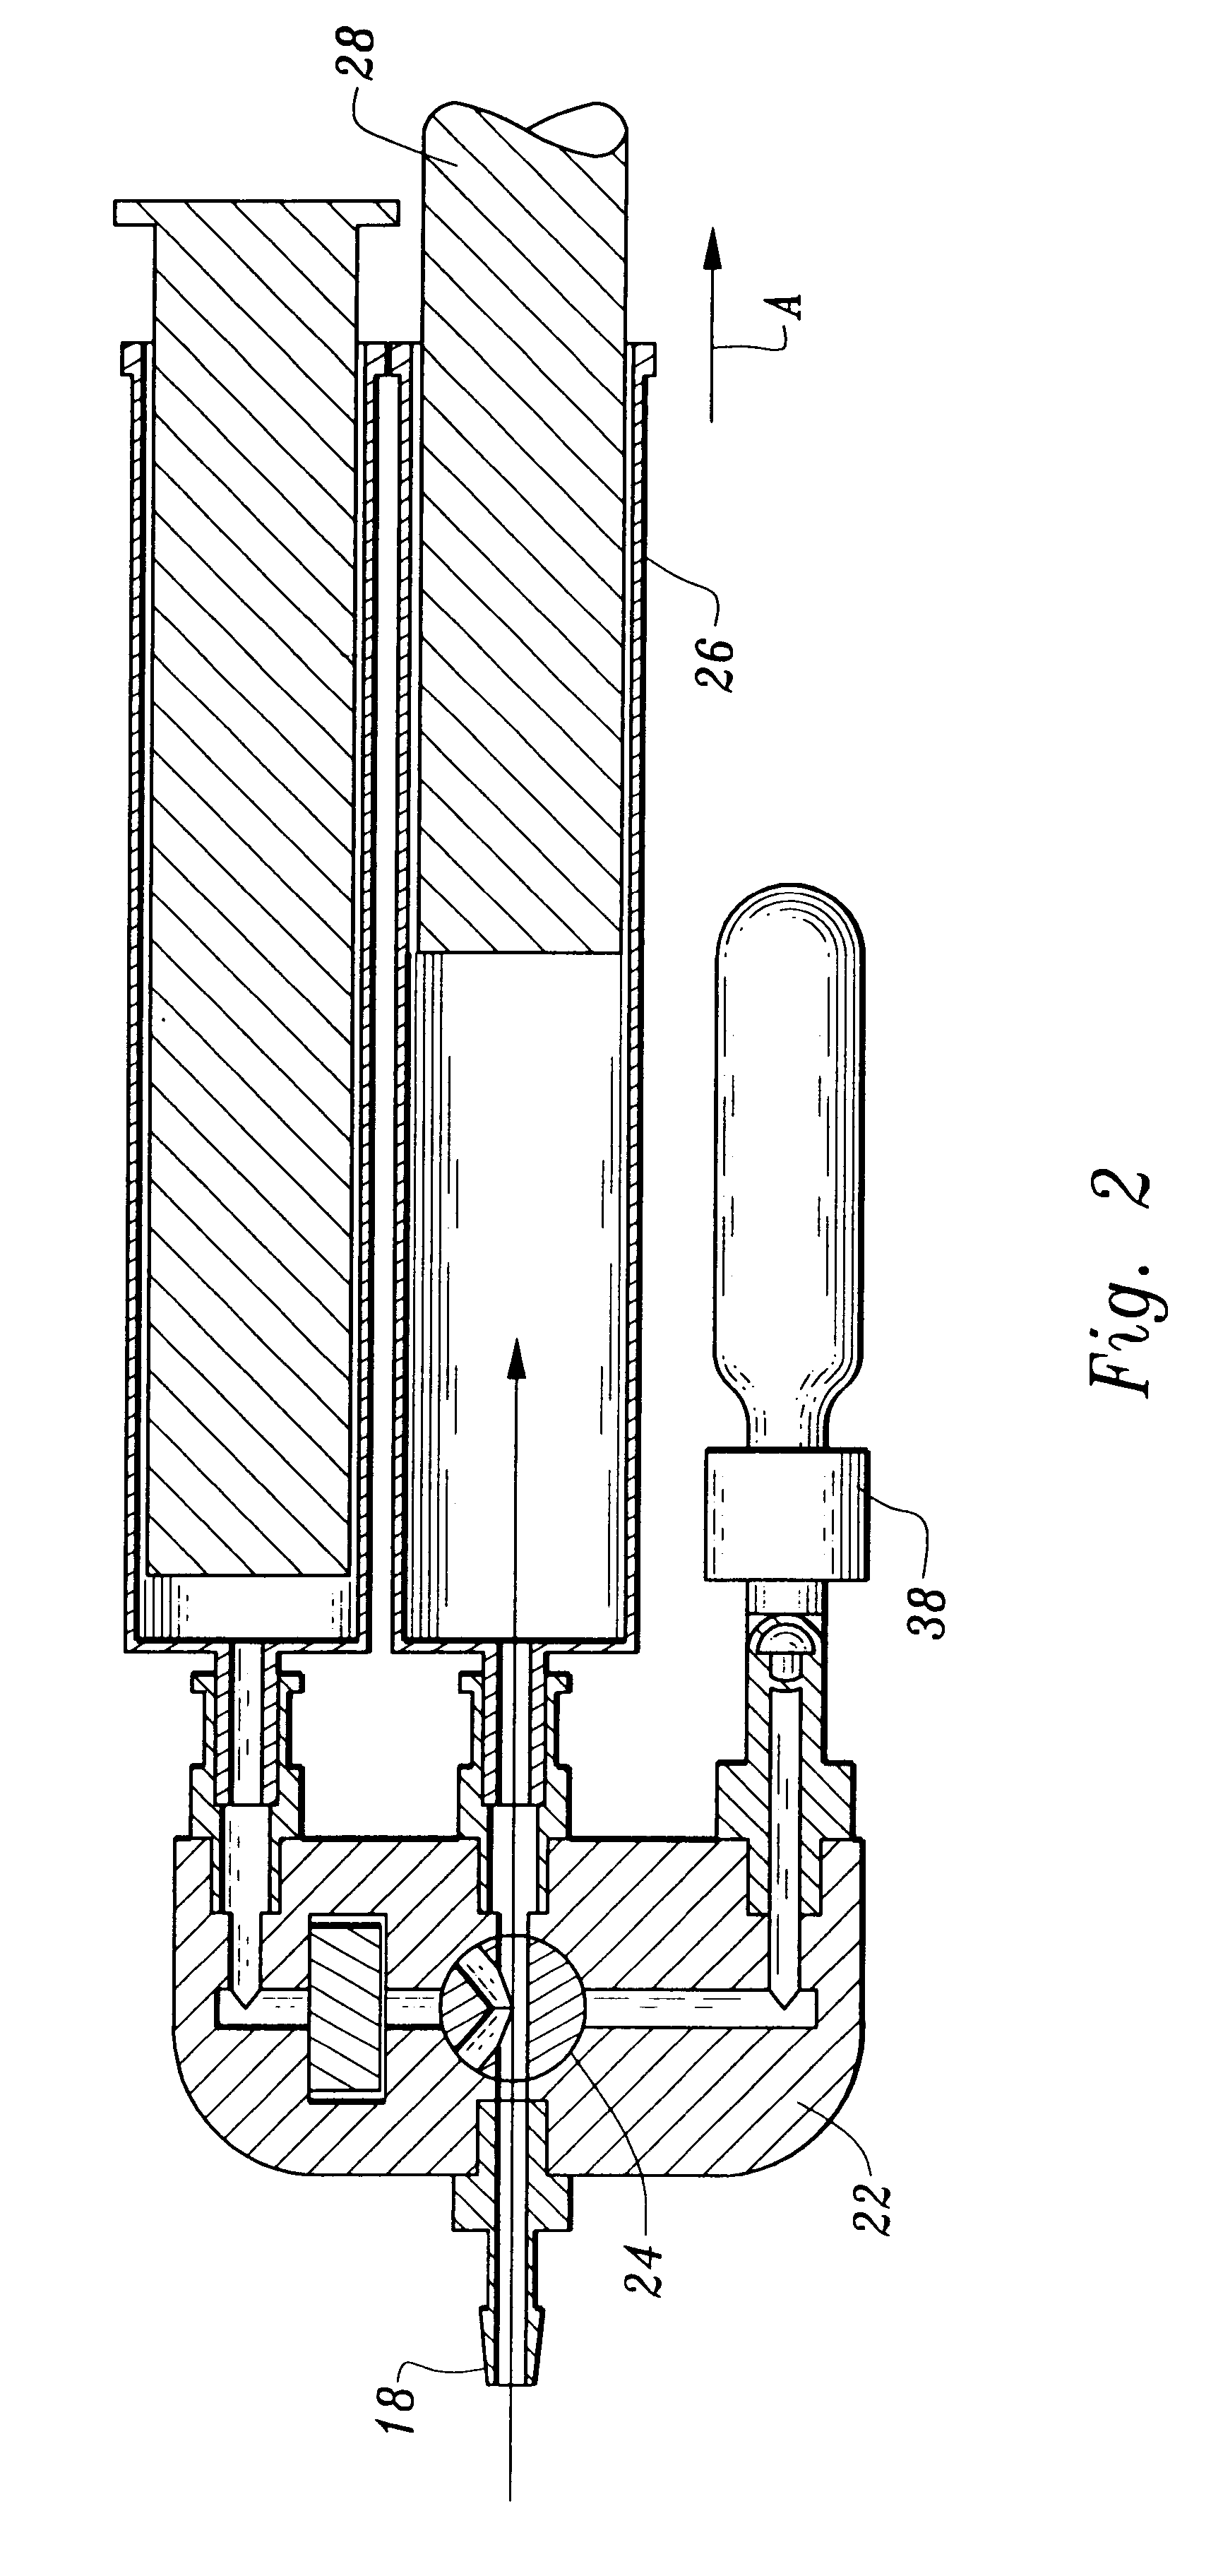 Apparatus and method of preparation of stable, long term thrombin from plasma and thrombin formed thereby